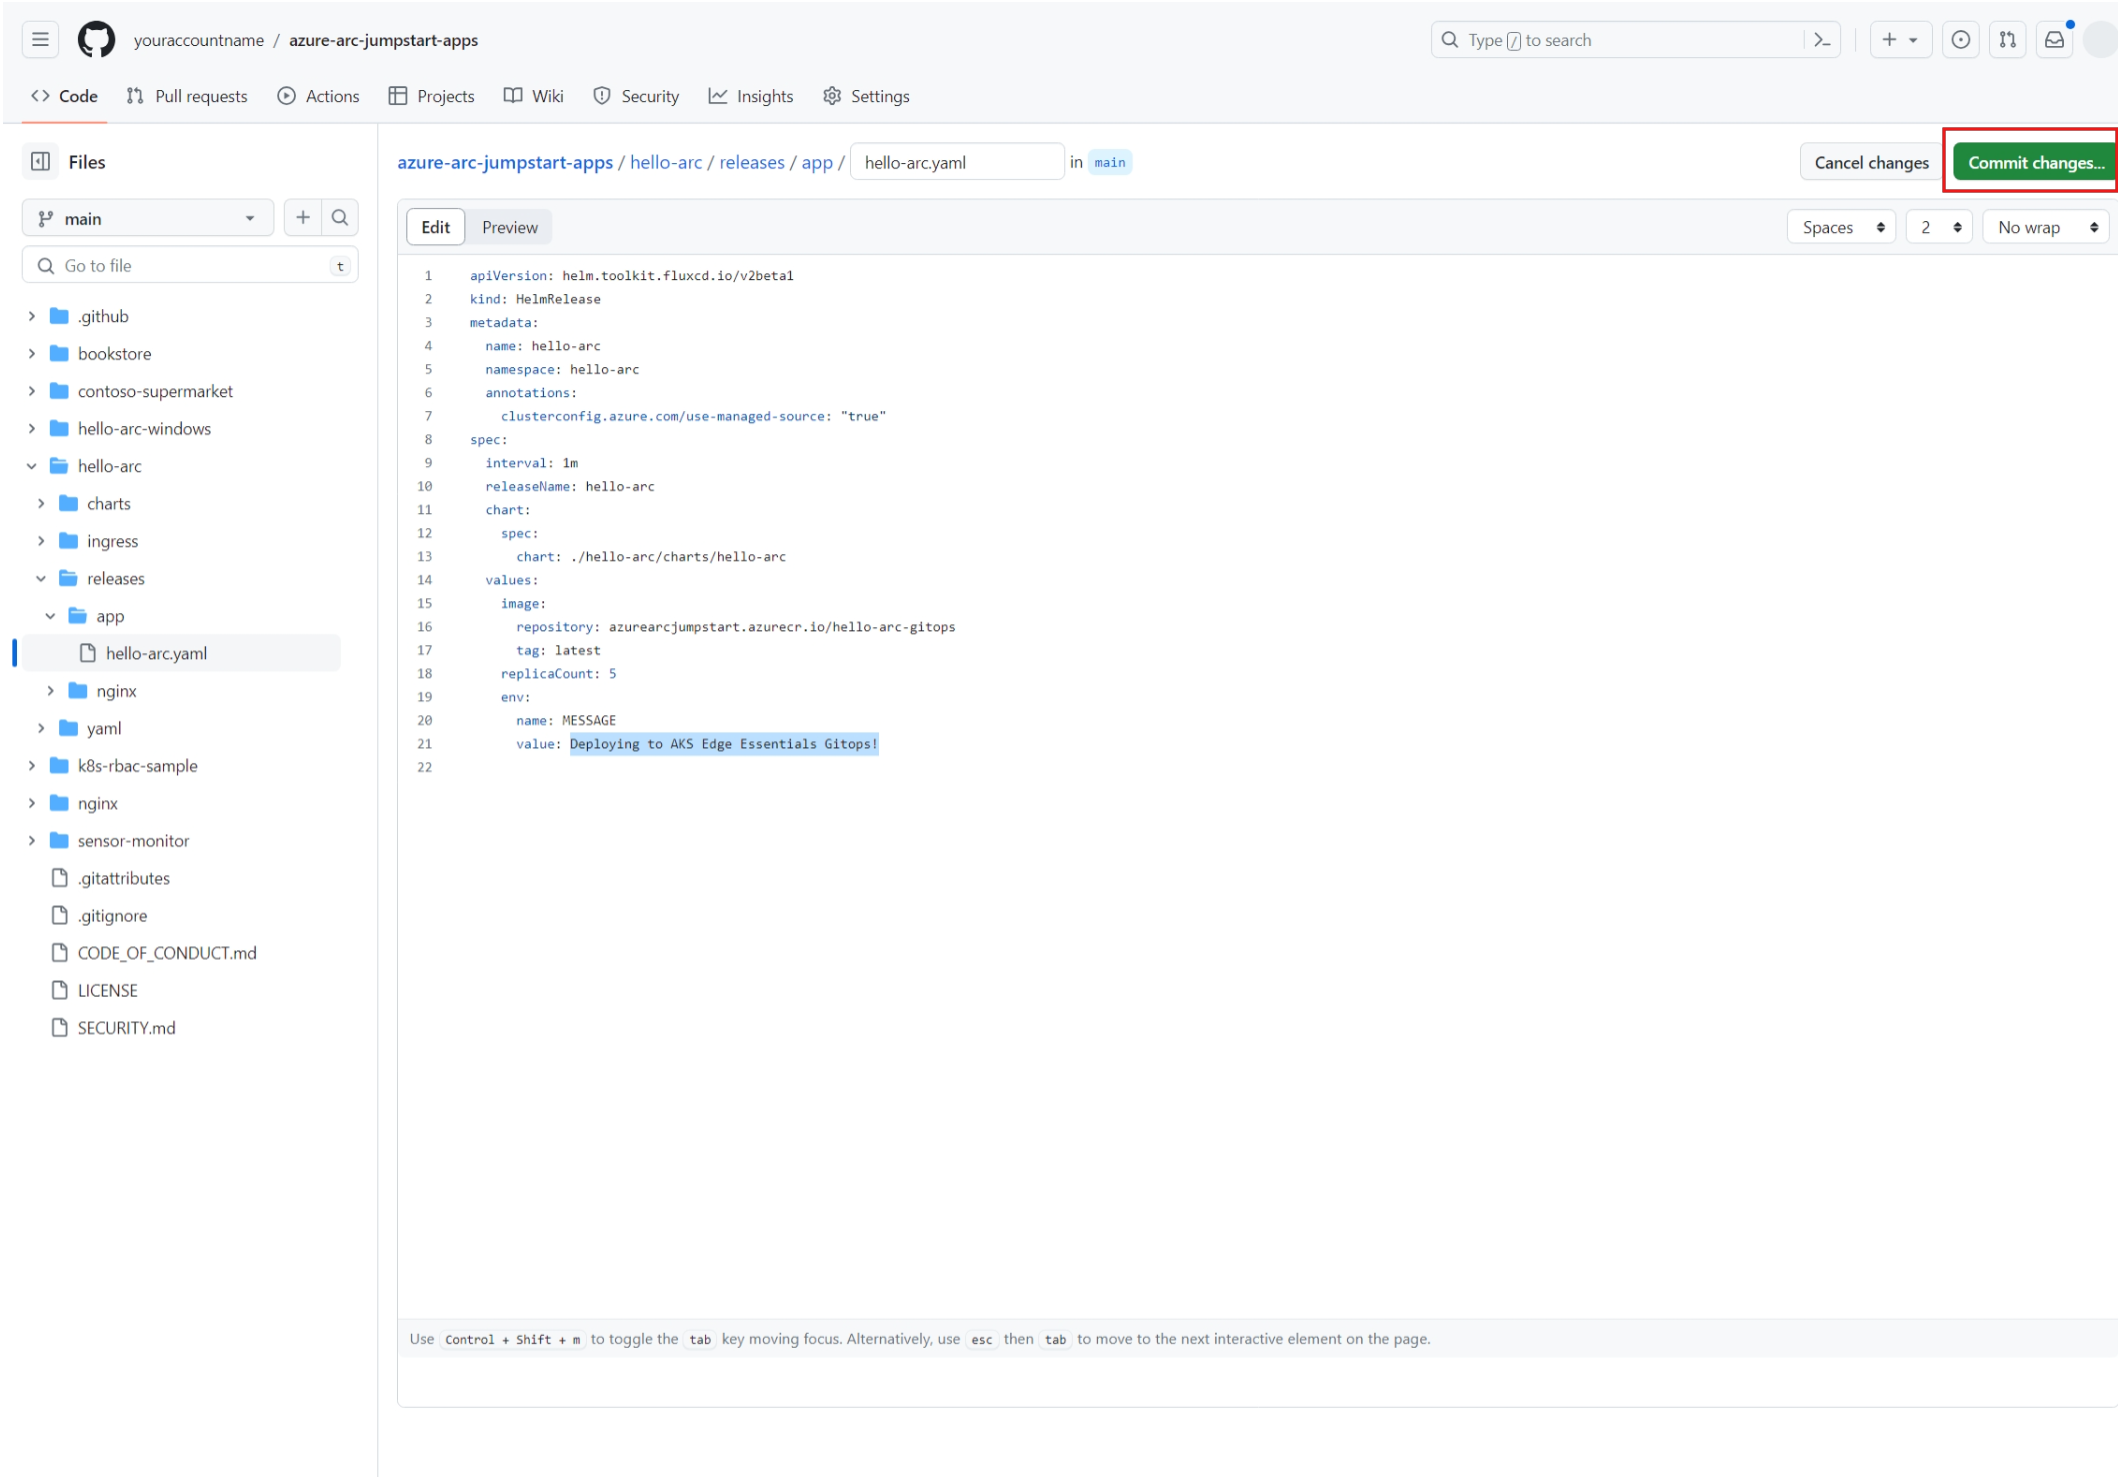 Screenshot of application changes in the GitHub repository.